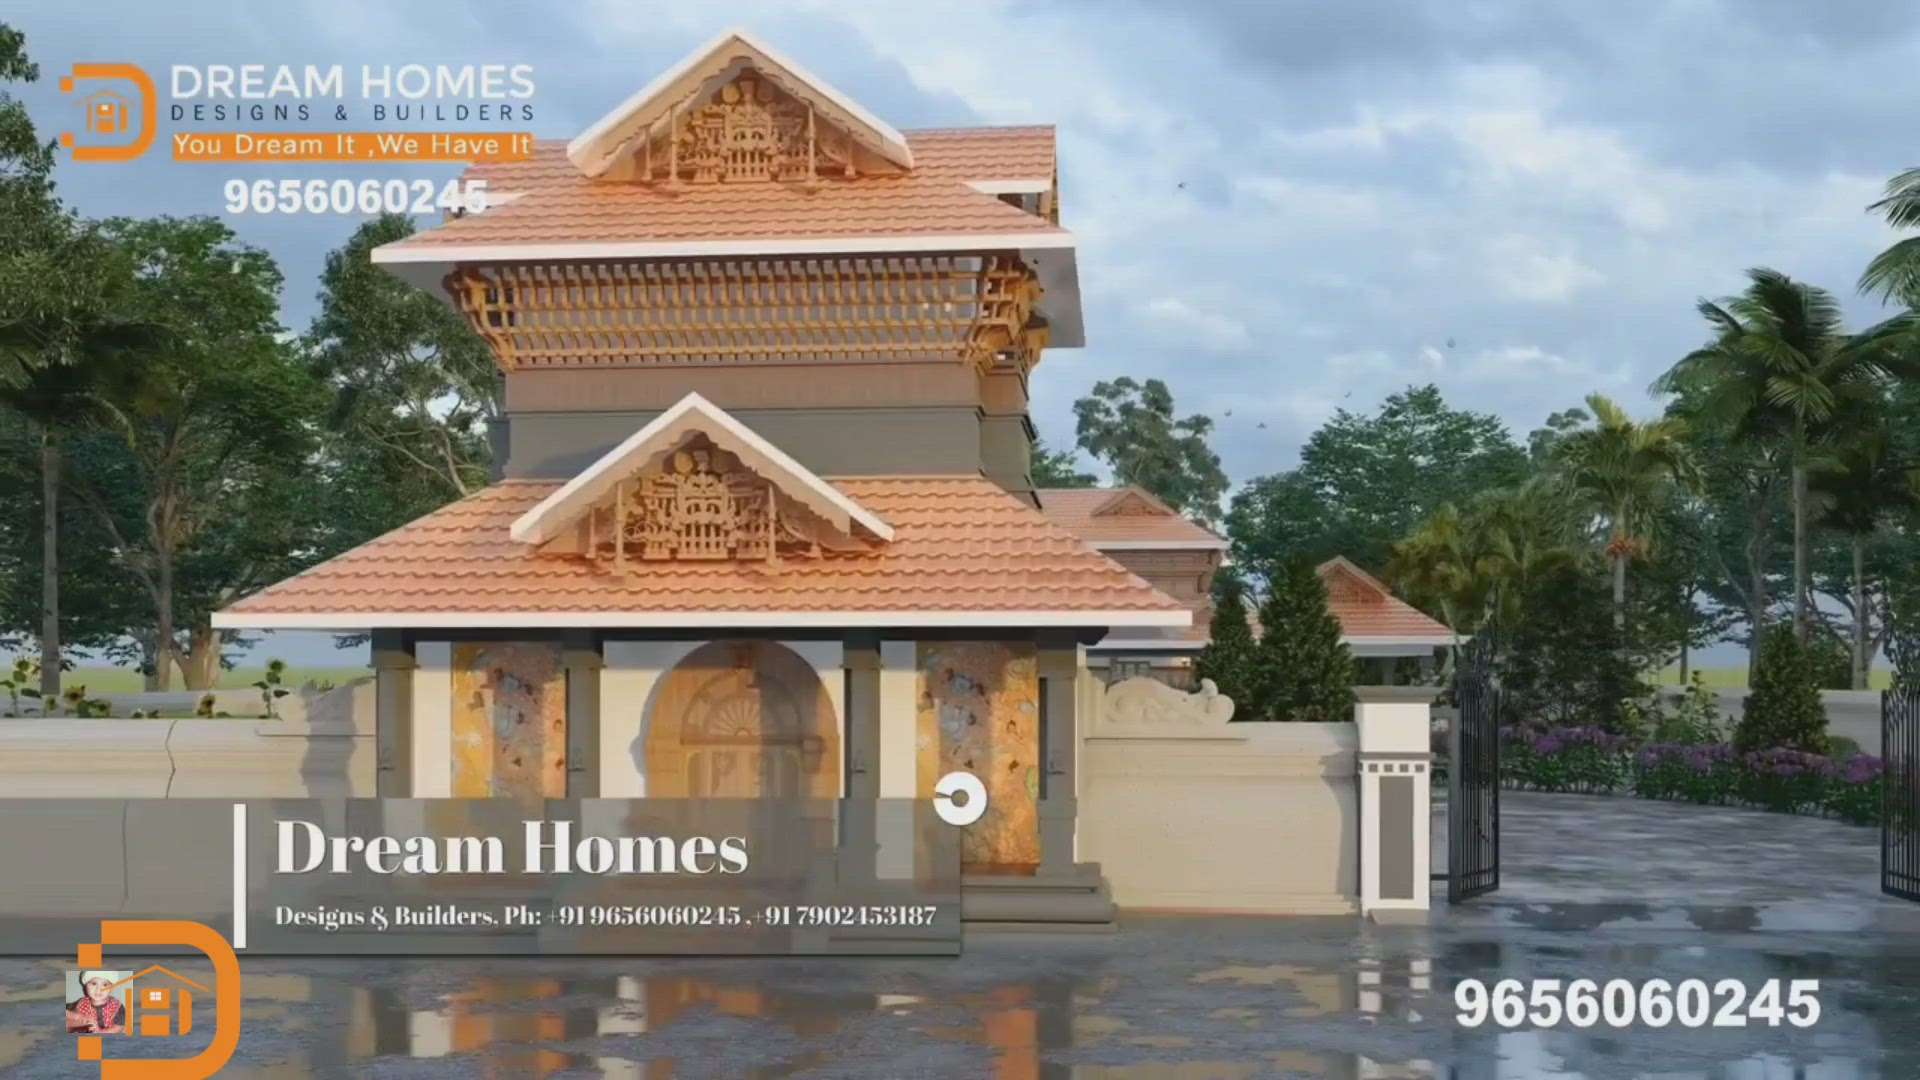 "DREAM HOMES DESIGNS & BUILDERS "
You Dream It, We Have It !
     
 7957 sqft വിസ്തൃതിയിൽ 3 നിലയിൽ  നാലുകെട്ട് ബംഗ്ലാവ് 👇

MileStone for upcoming  succession of Dream Homes 👇
Please go through the musical session and enjoy the traditional vibe!

Spare yourself from the stress of construction, we assist you whenever needed. 
We have Customised Design Packages that Clients can choose what they need and require. 
We Offer :
=> House Construction & Renovation
=> Commercial Buildings, Apartments
=> Temple Construction in Geometry
=> Well Designed Vasthu Architecture
=>  Interior Designs 
=>  Loan Application 
=> Permits & Licenses 

We are providing service to all over India 
No Compromise on Quality, Sincerity & Efficiency.

For more info 
9656060245
7902453187